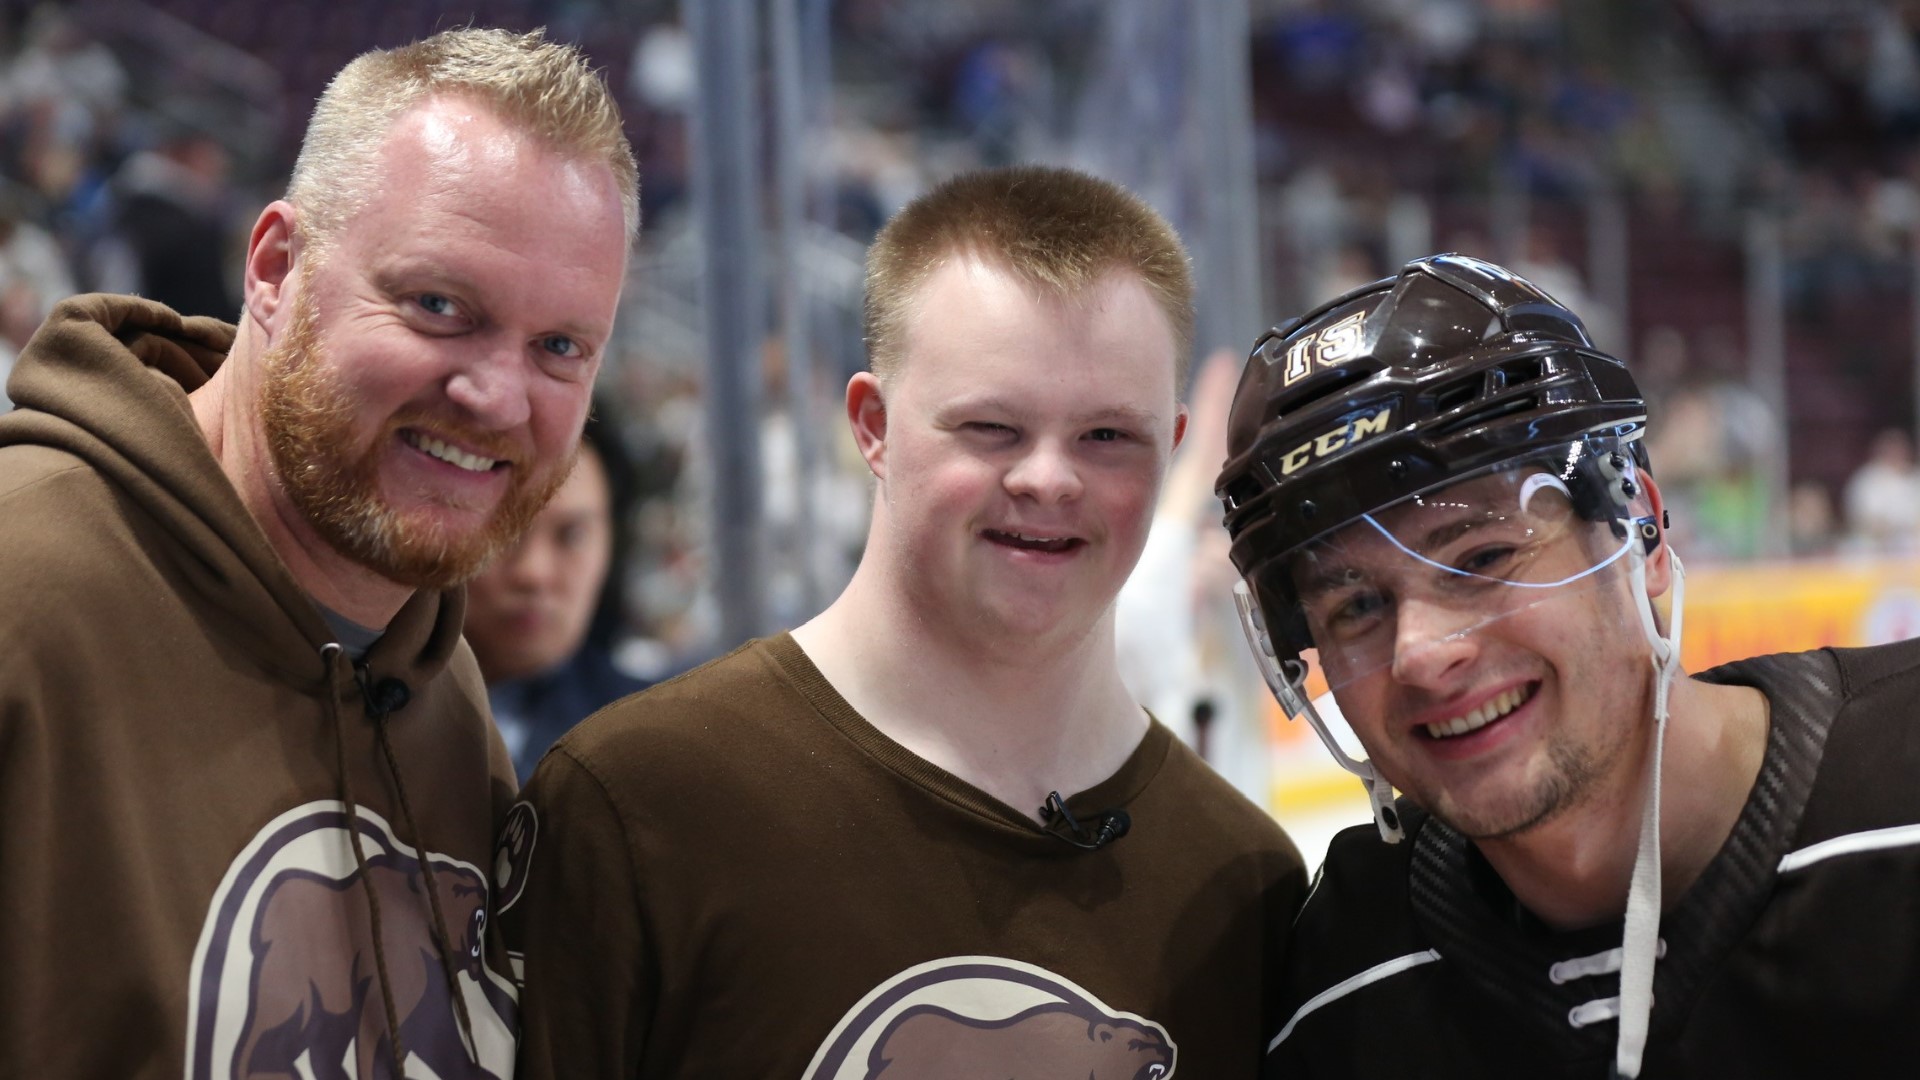 A fist bump turned into a pre-game ritual between Cooper and Hershey Bears forward Jimmy Huntington, forging an unbreakable friendship and a reunion to remember.